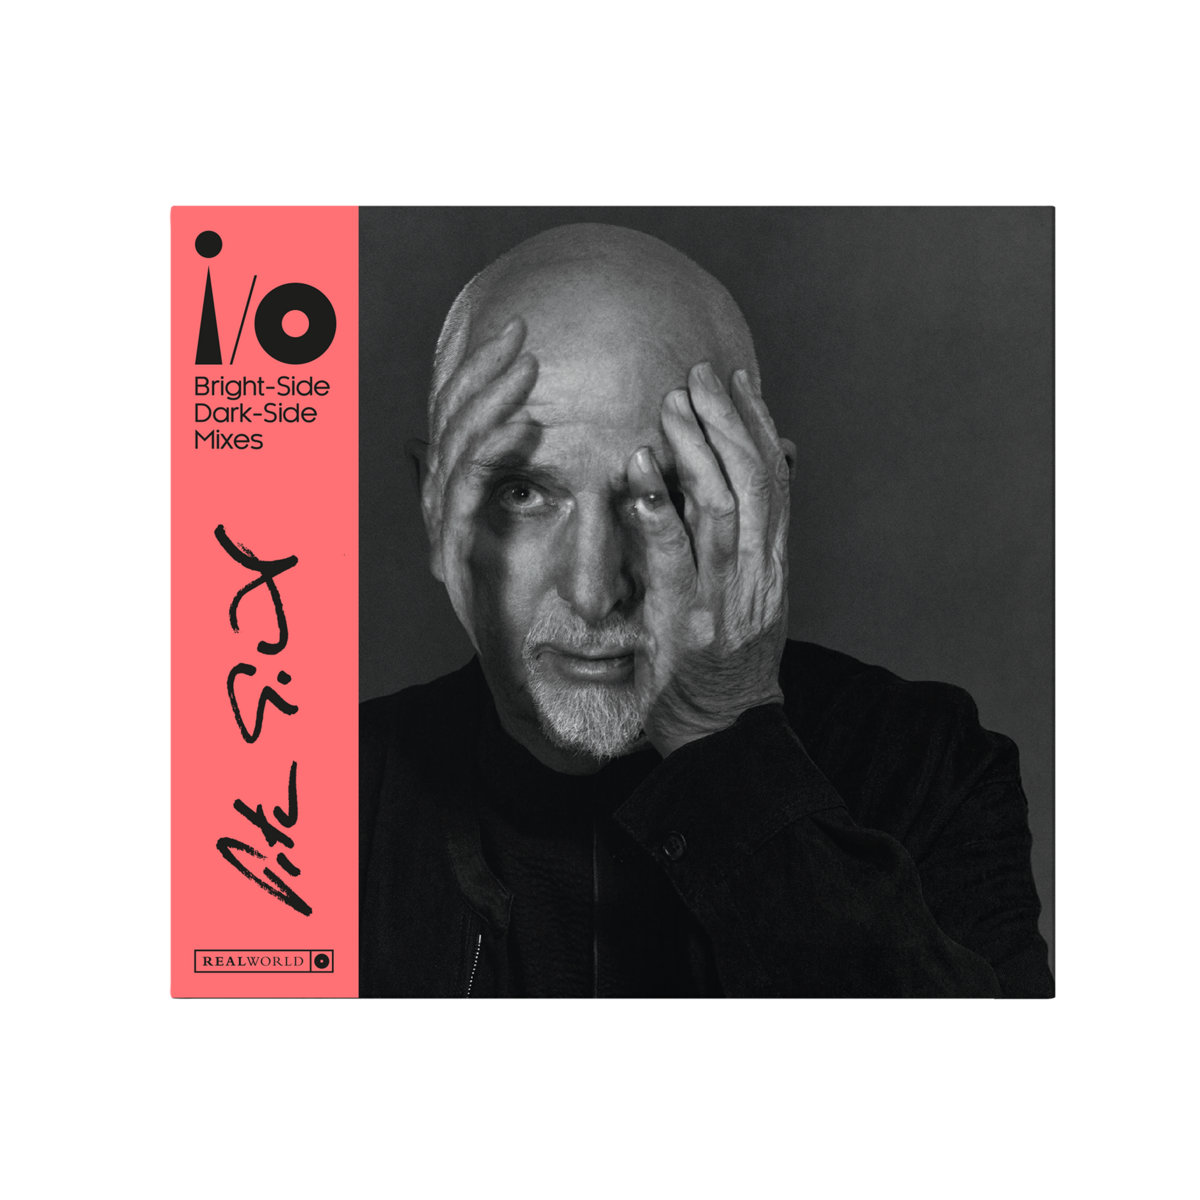 Peter Gabriel’s release of “i/o”